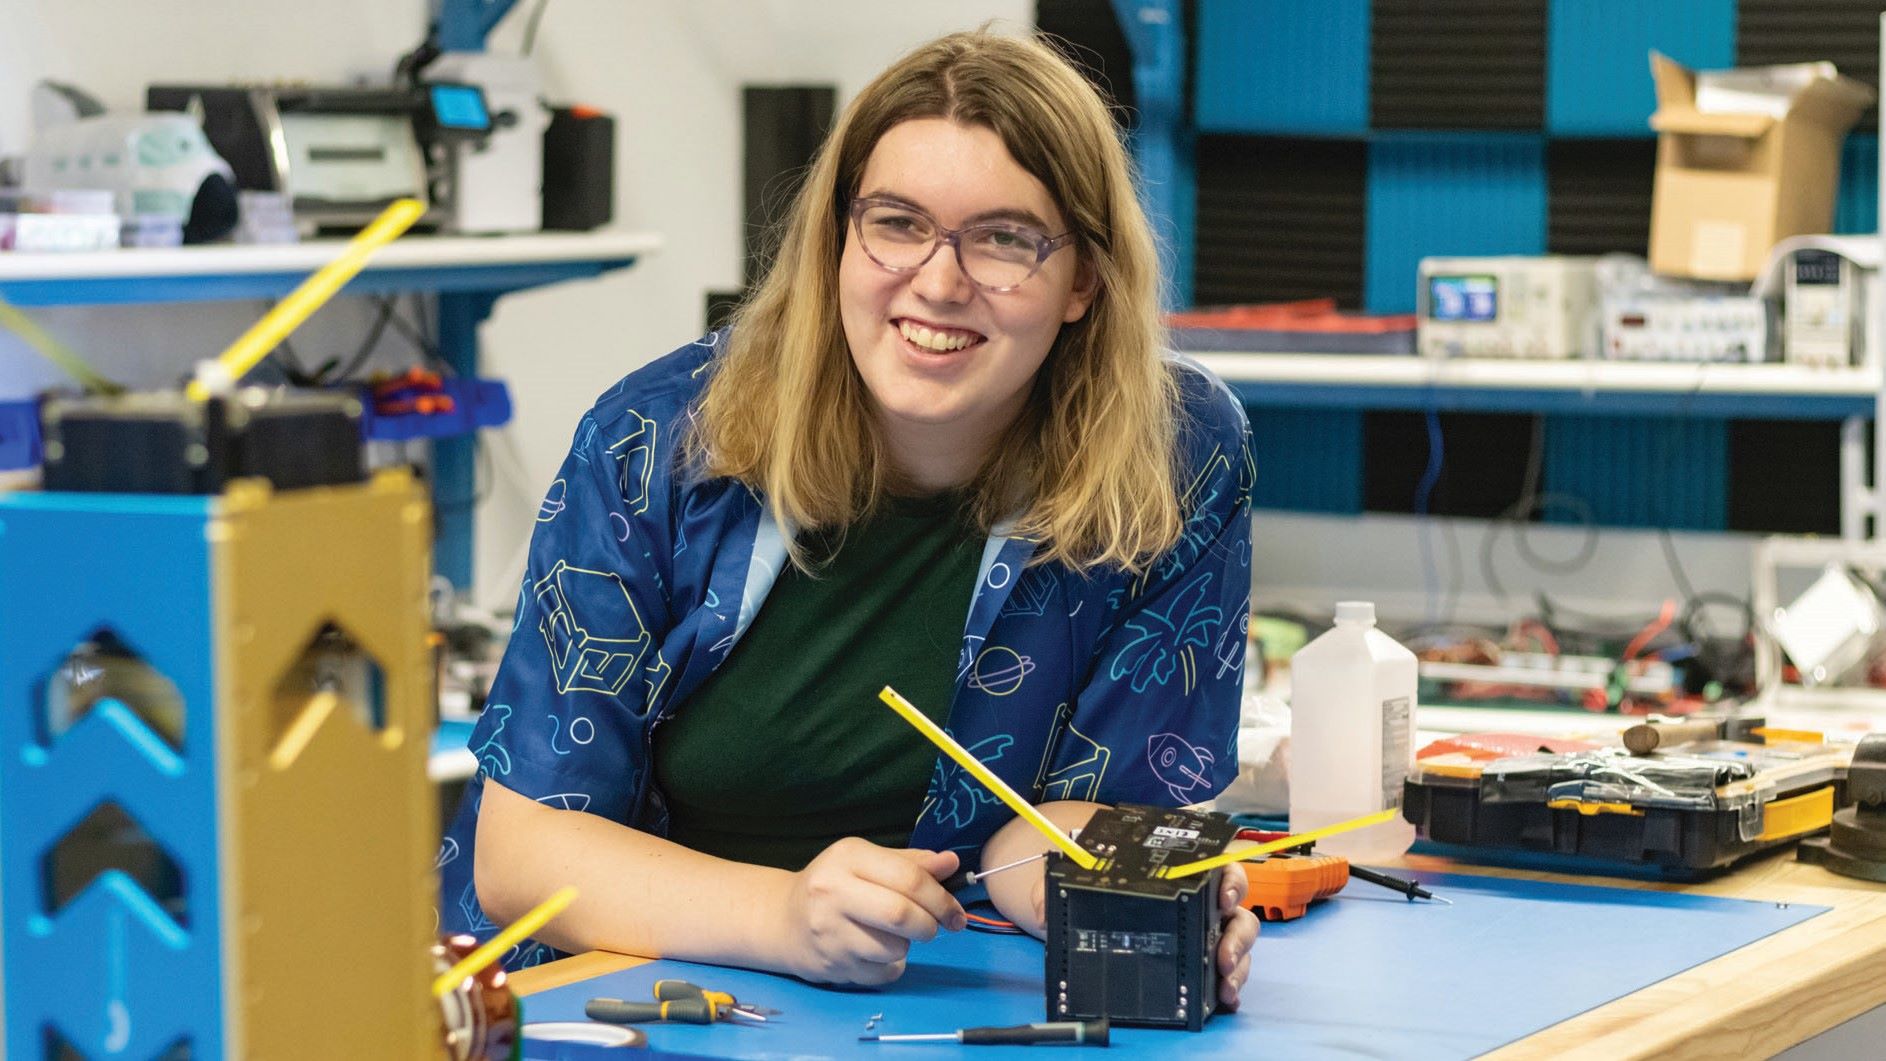 A female engineering student working on a CubeSat, a miniature satellite.